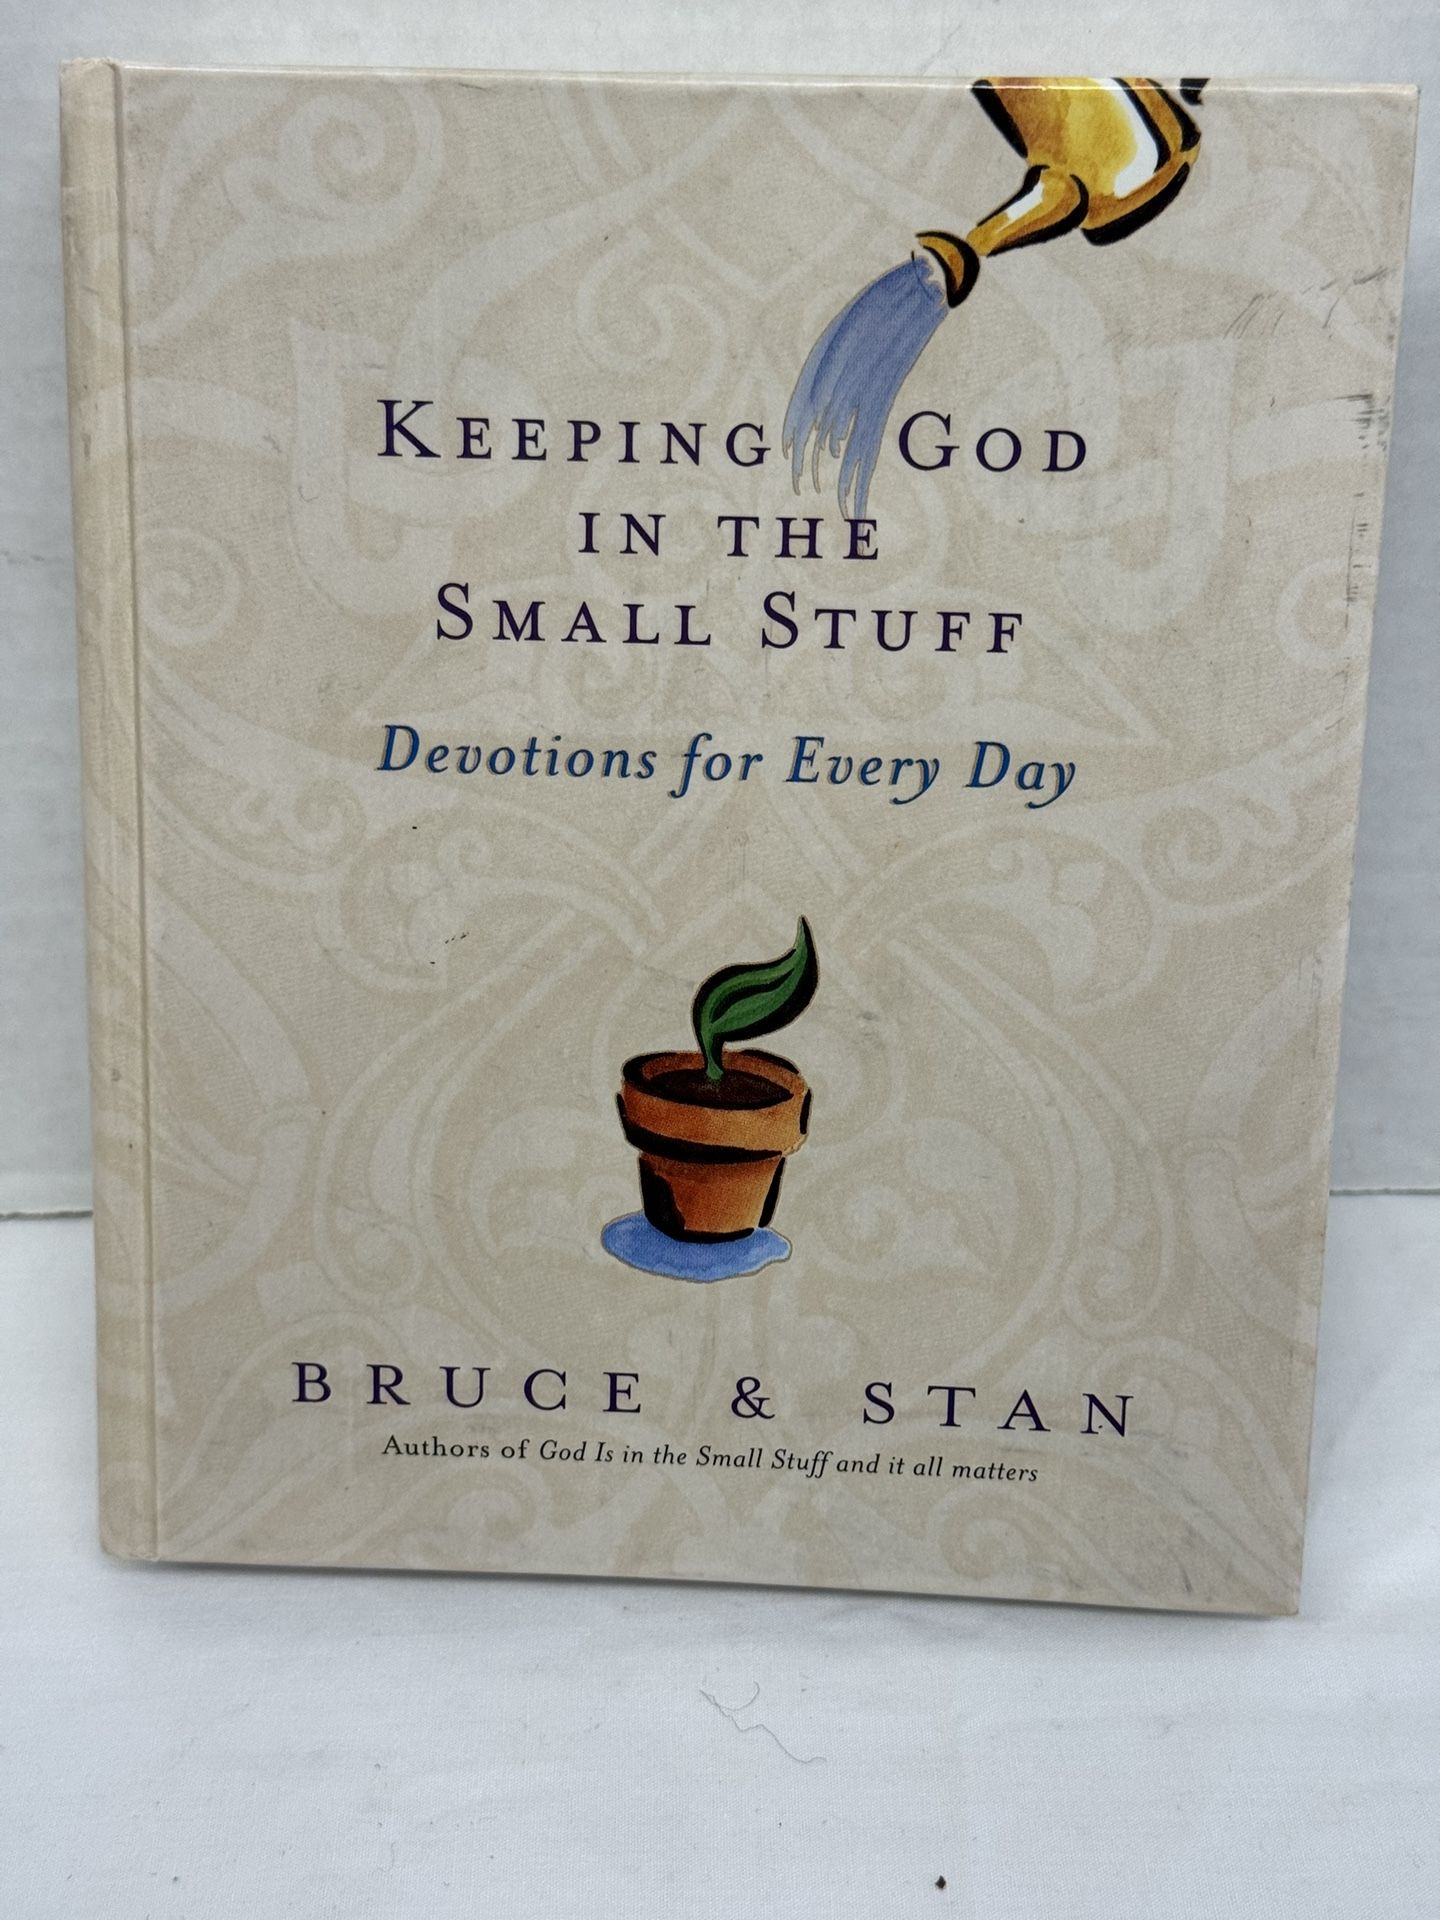 Book- Keeping God in the Small Stuff. Devotions for Every Day by Bruce & Stan